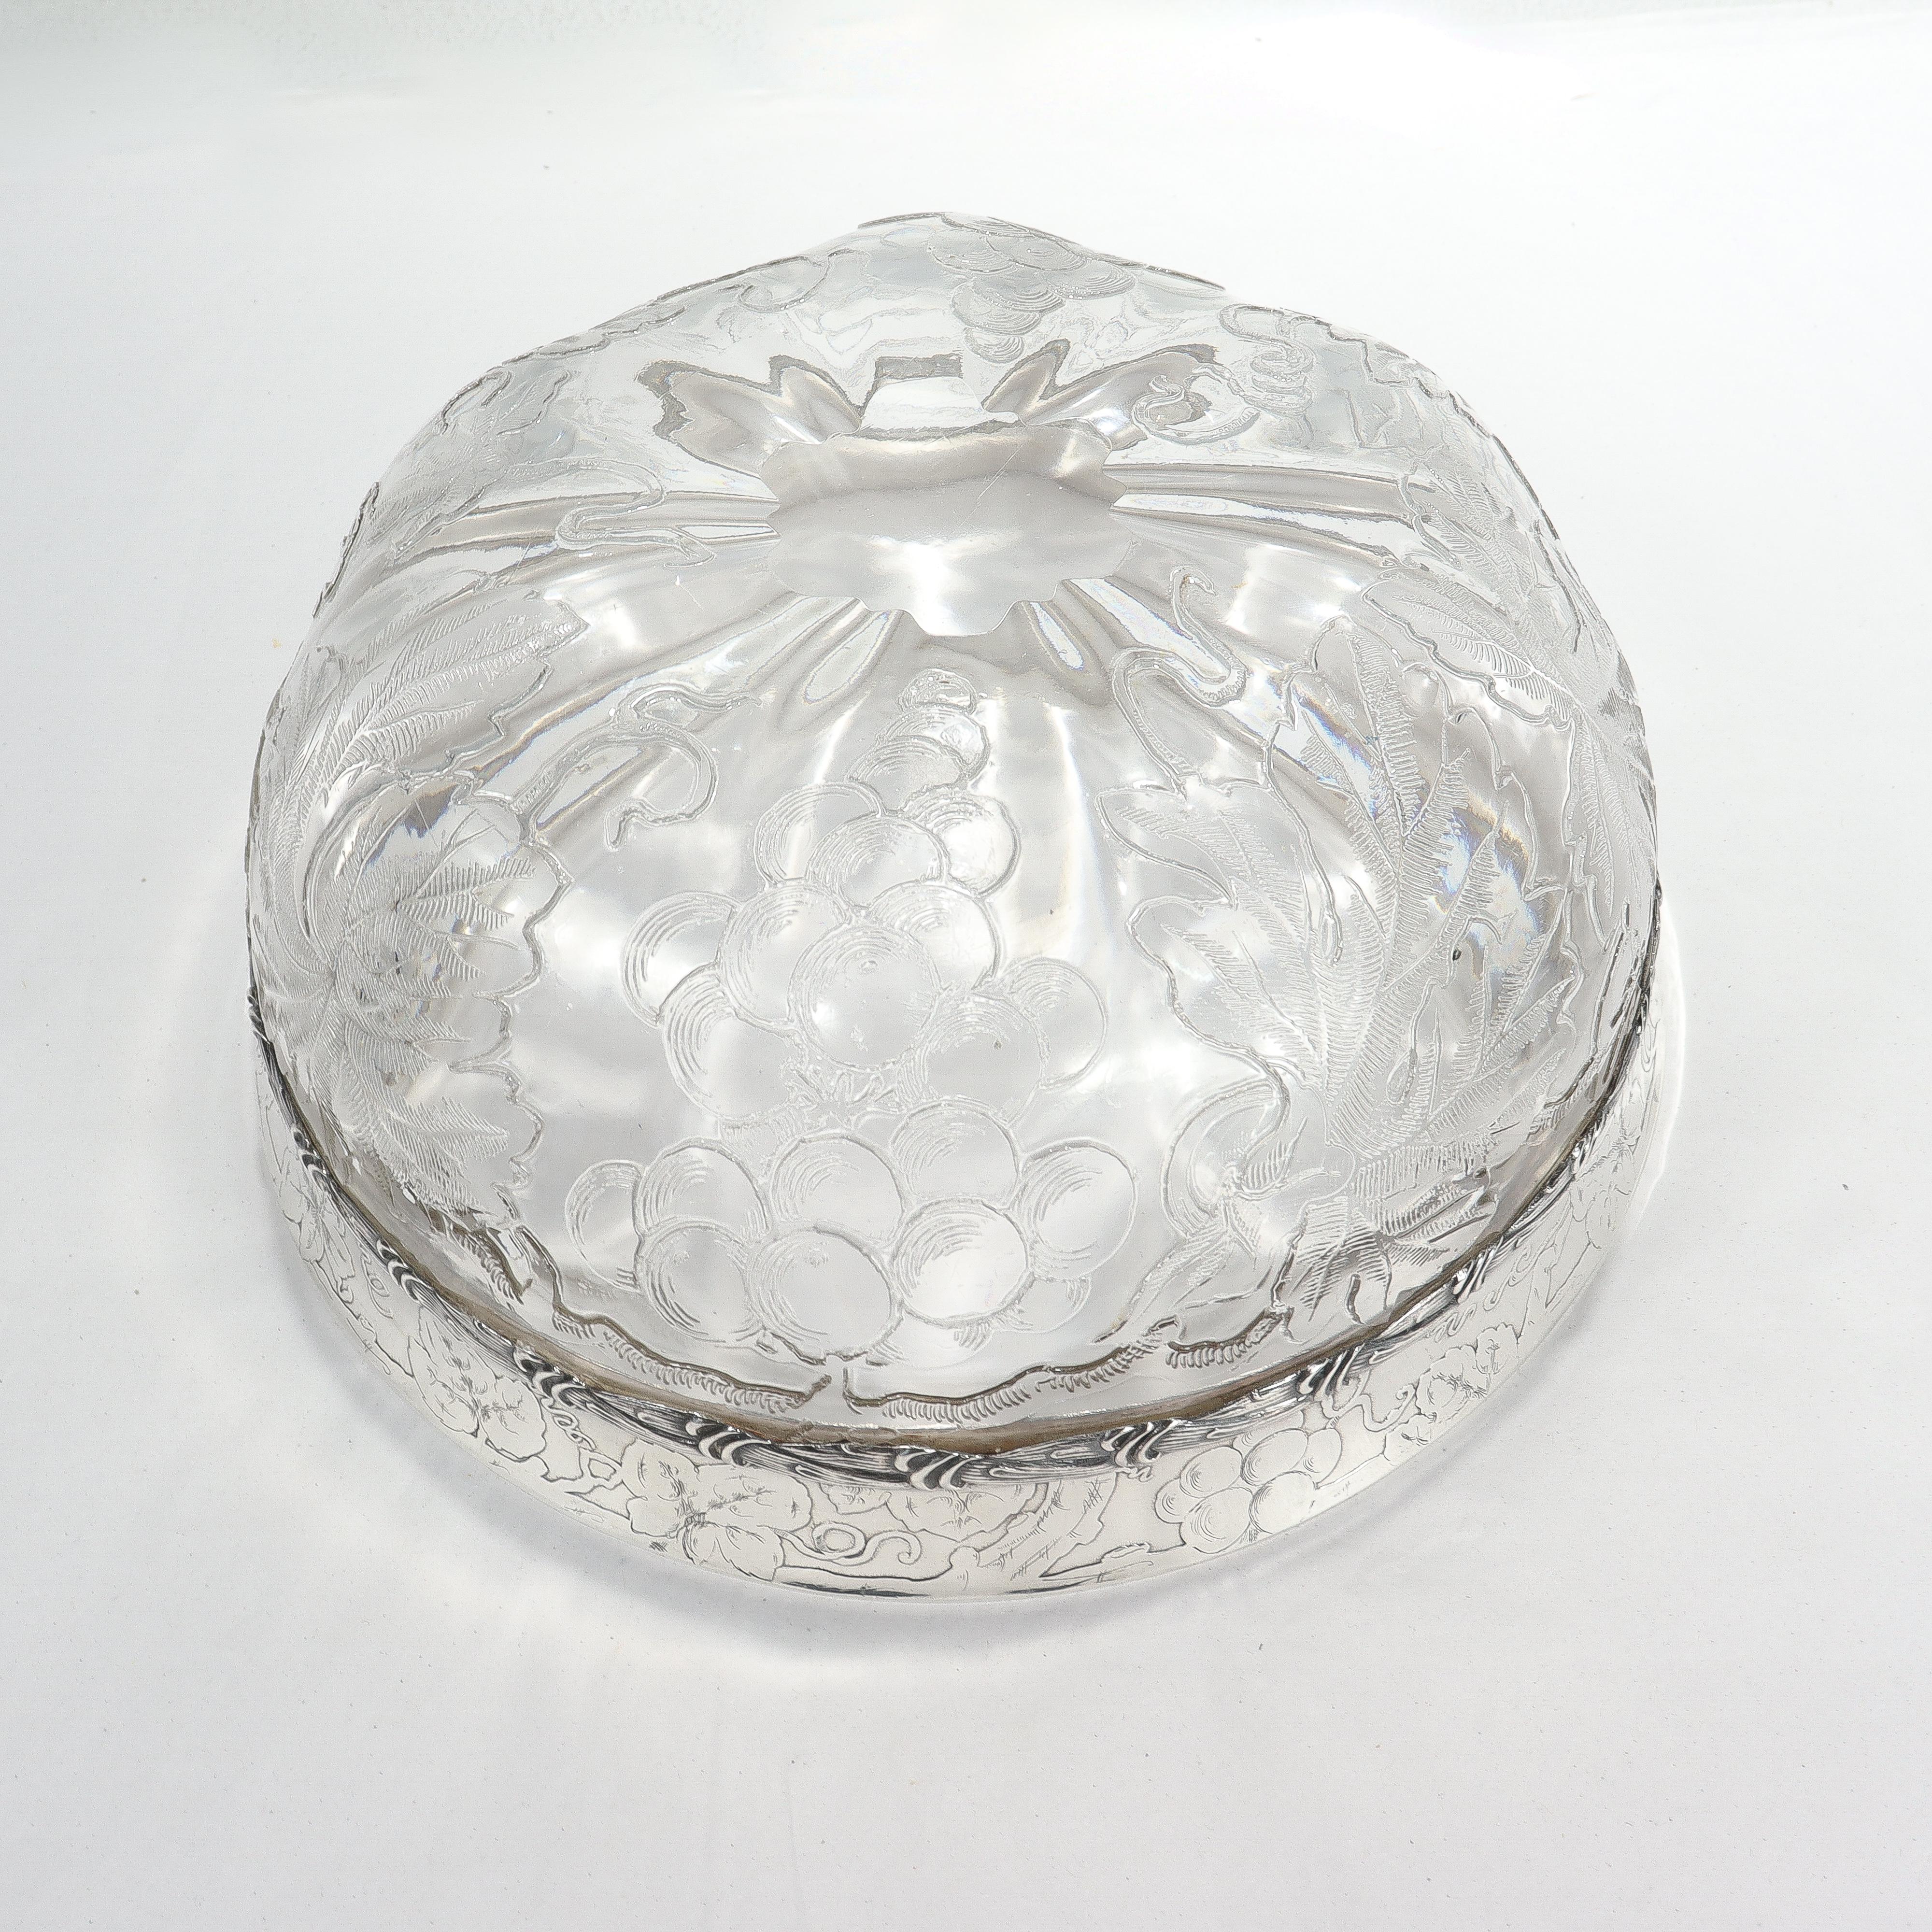 Antique Tiffany & Co. Sterling Silver Mounted 'Rock Crystal' Cut Glass Bowl 4